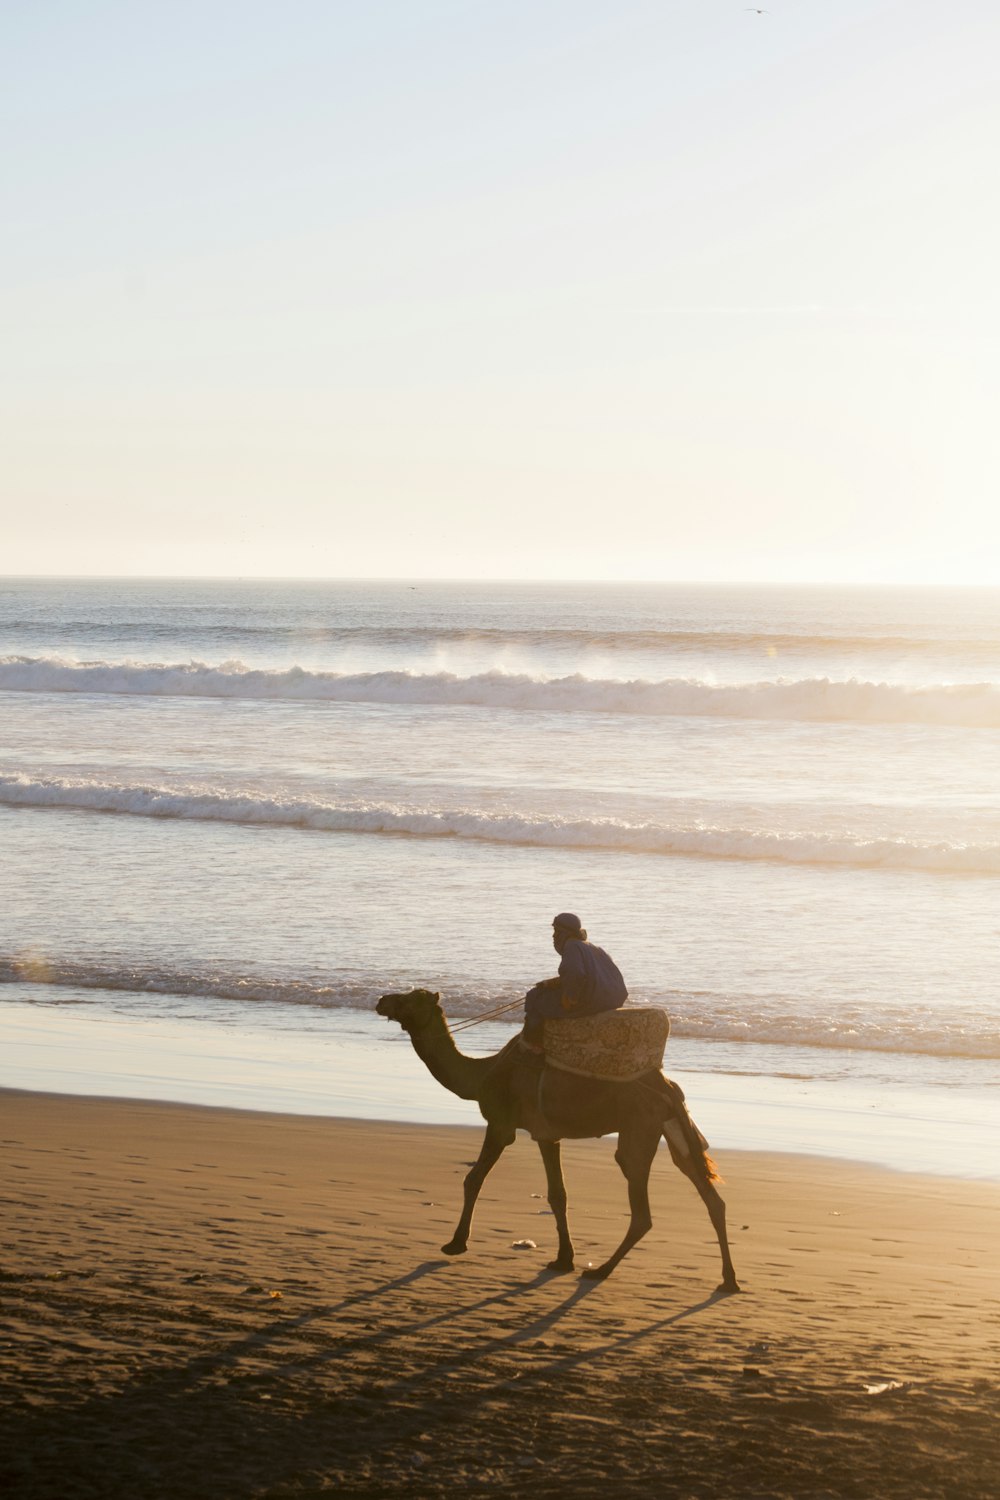 person riding a camel beside body of water during dayitme